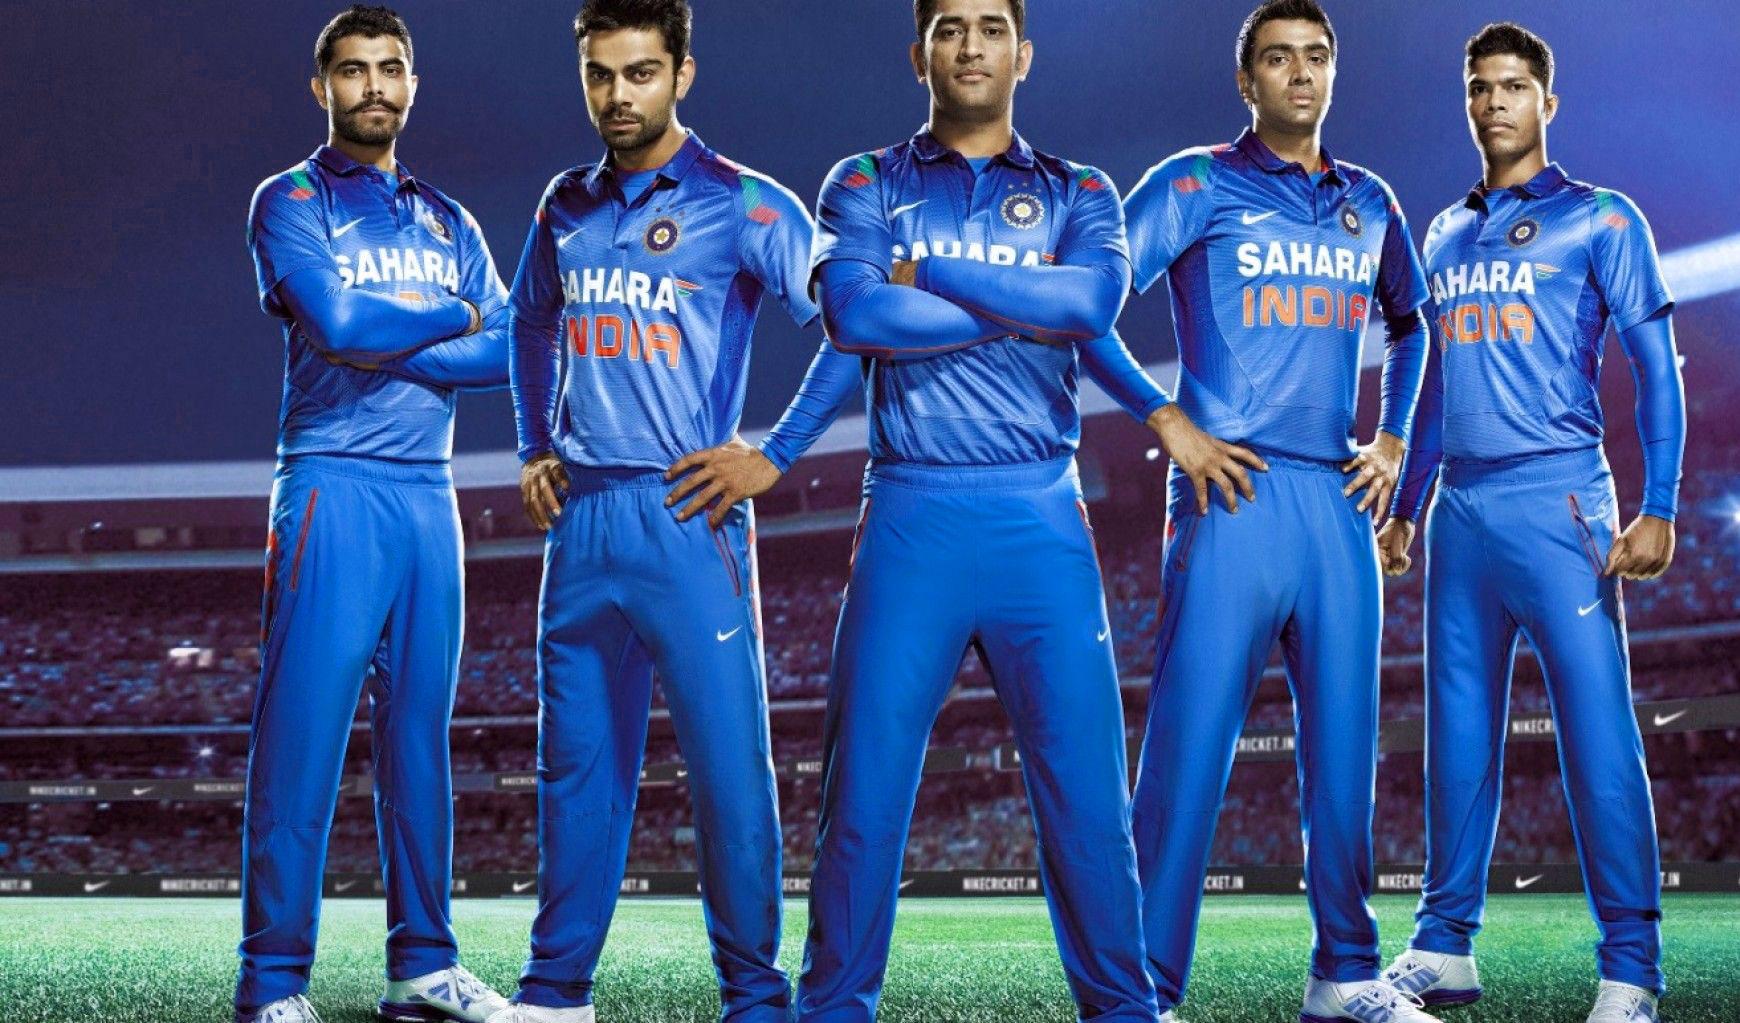 Indian Cricket Team Player Image Wallpaper Photo Pics for World Cup